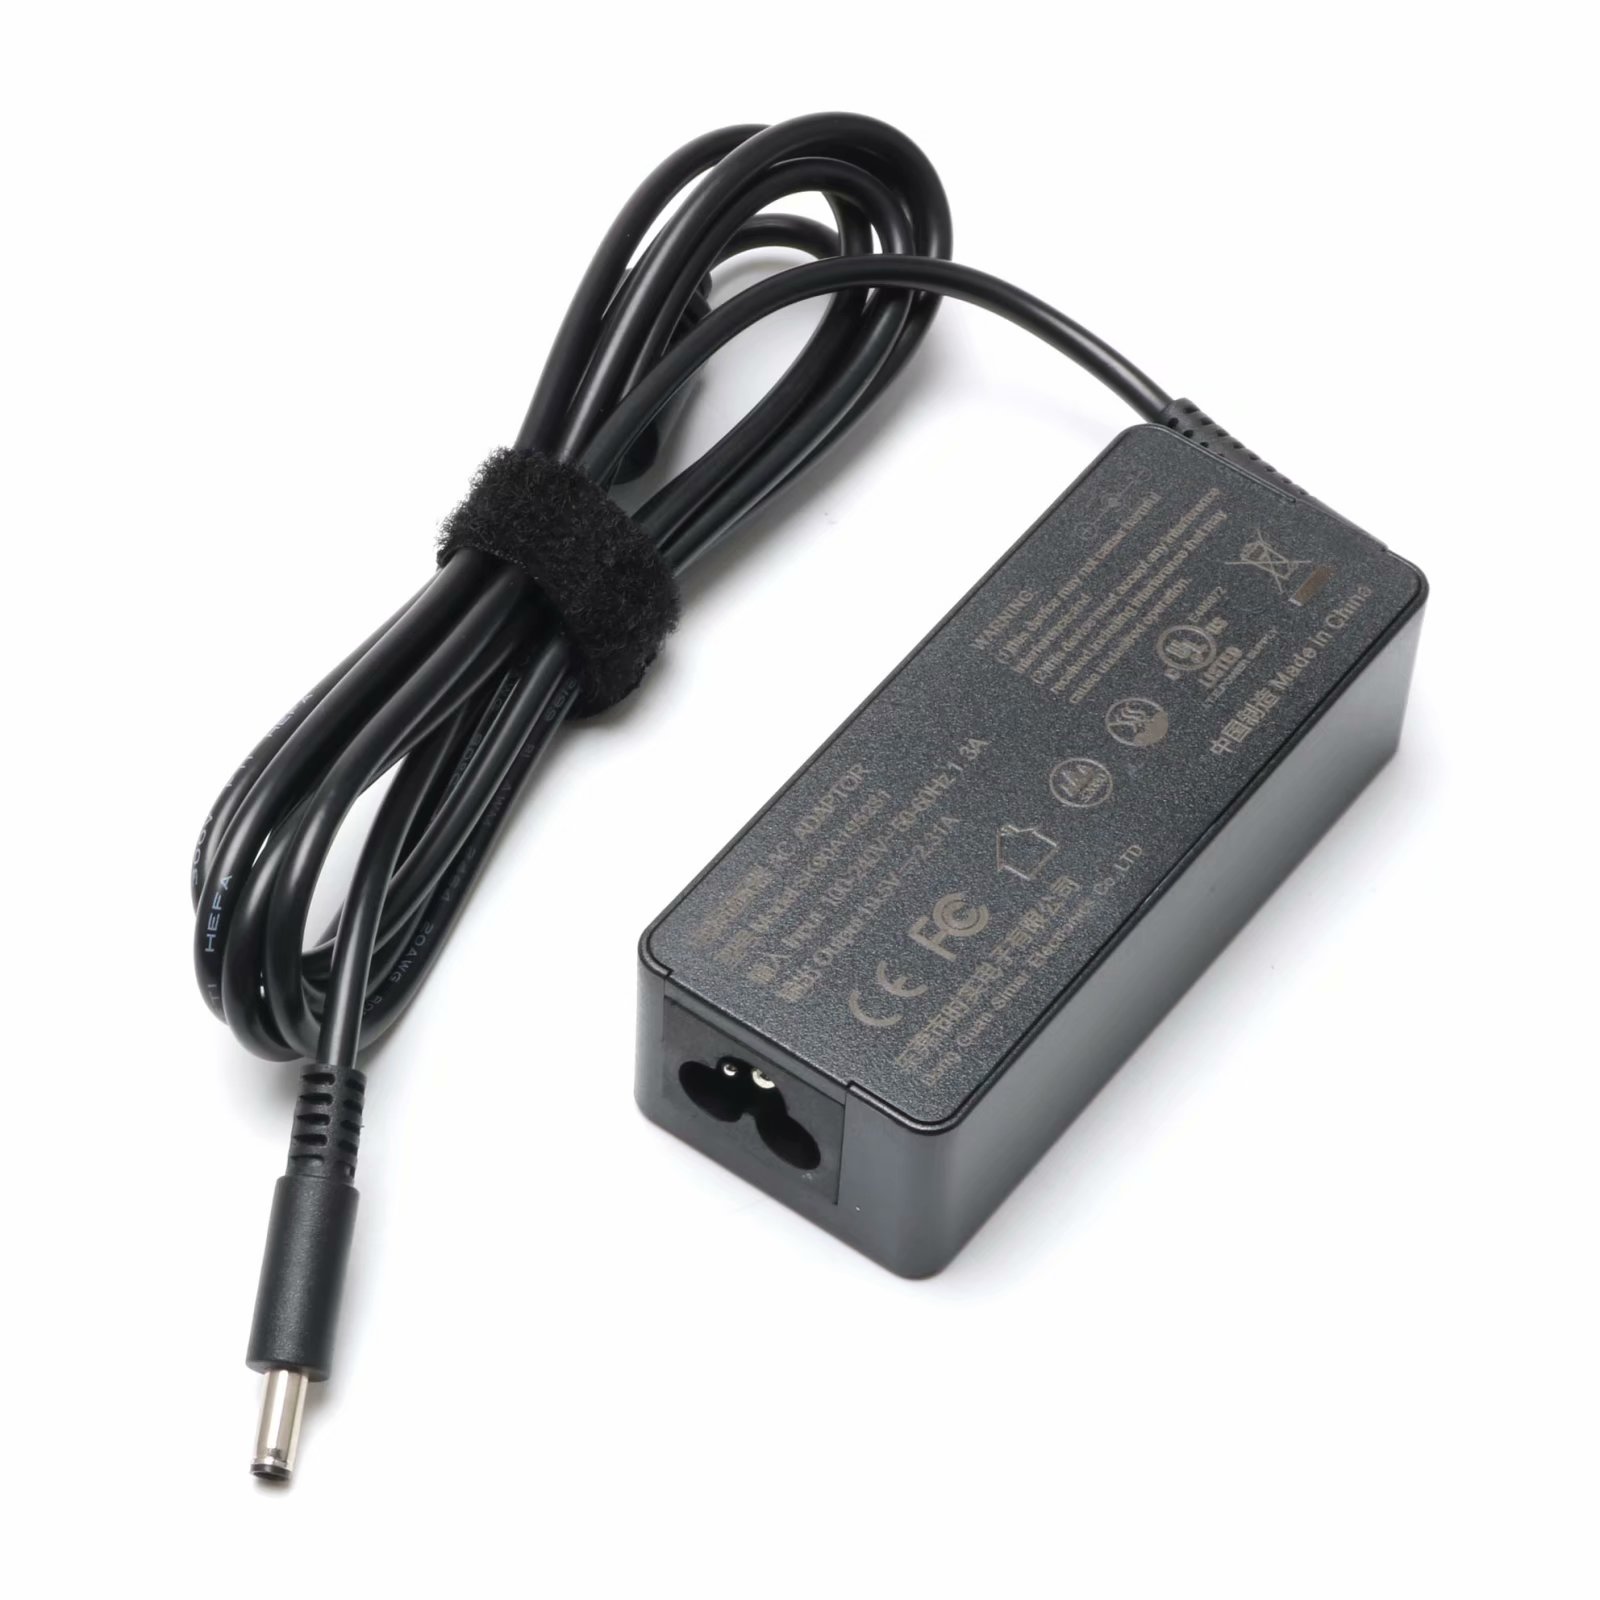 19.5V 2.31A 45W AC Adapter Charger for Dell Inspiron 11 13 14 17 15 5000 3000 7000 Series 5559 5558 5570 HK45NM140 LA45NM131 LA45NM140 HA45NM140 KXTTW LA45NM121 Laptop Power Supply Cord - image 2 of 11